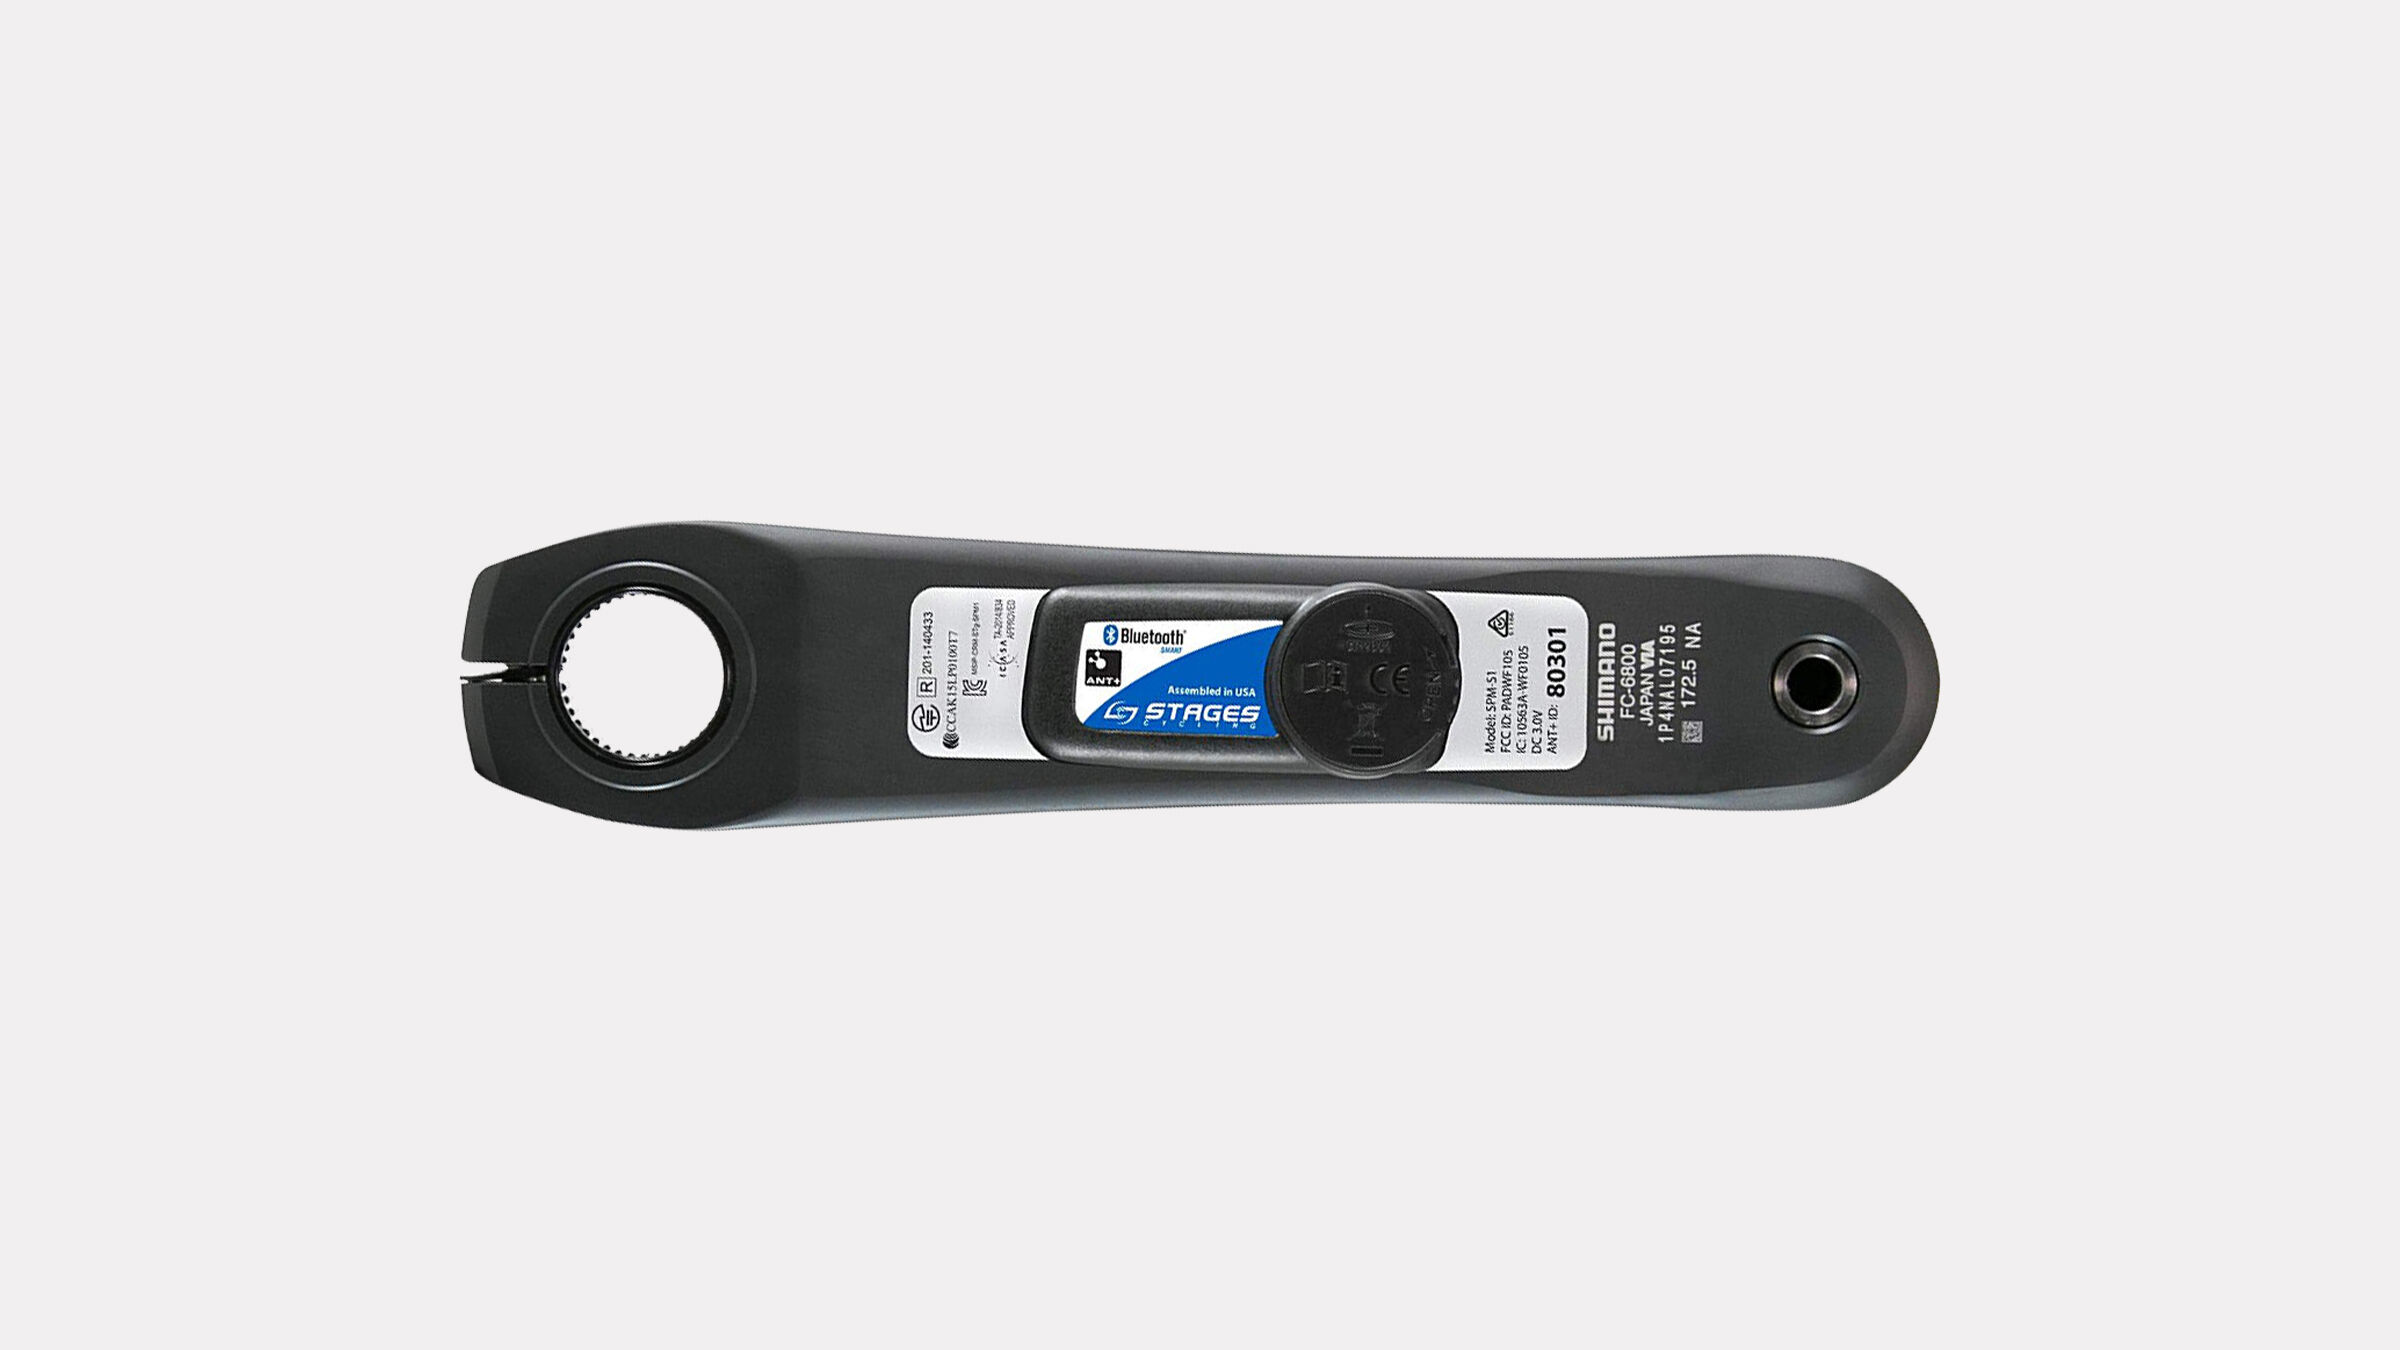 Stages Power Meter Ultegra 165mm Sale, SAVE 56%.